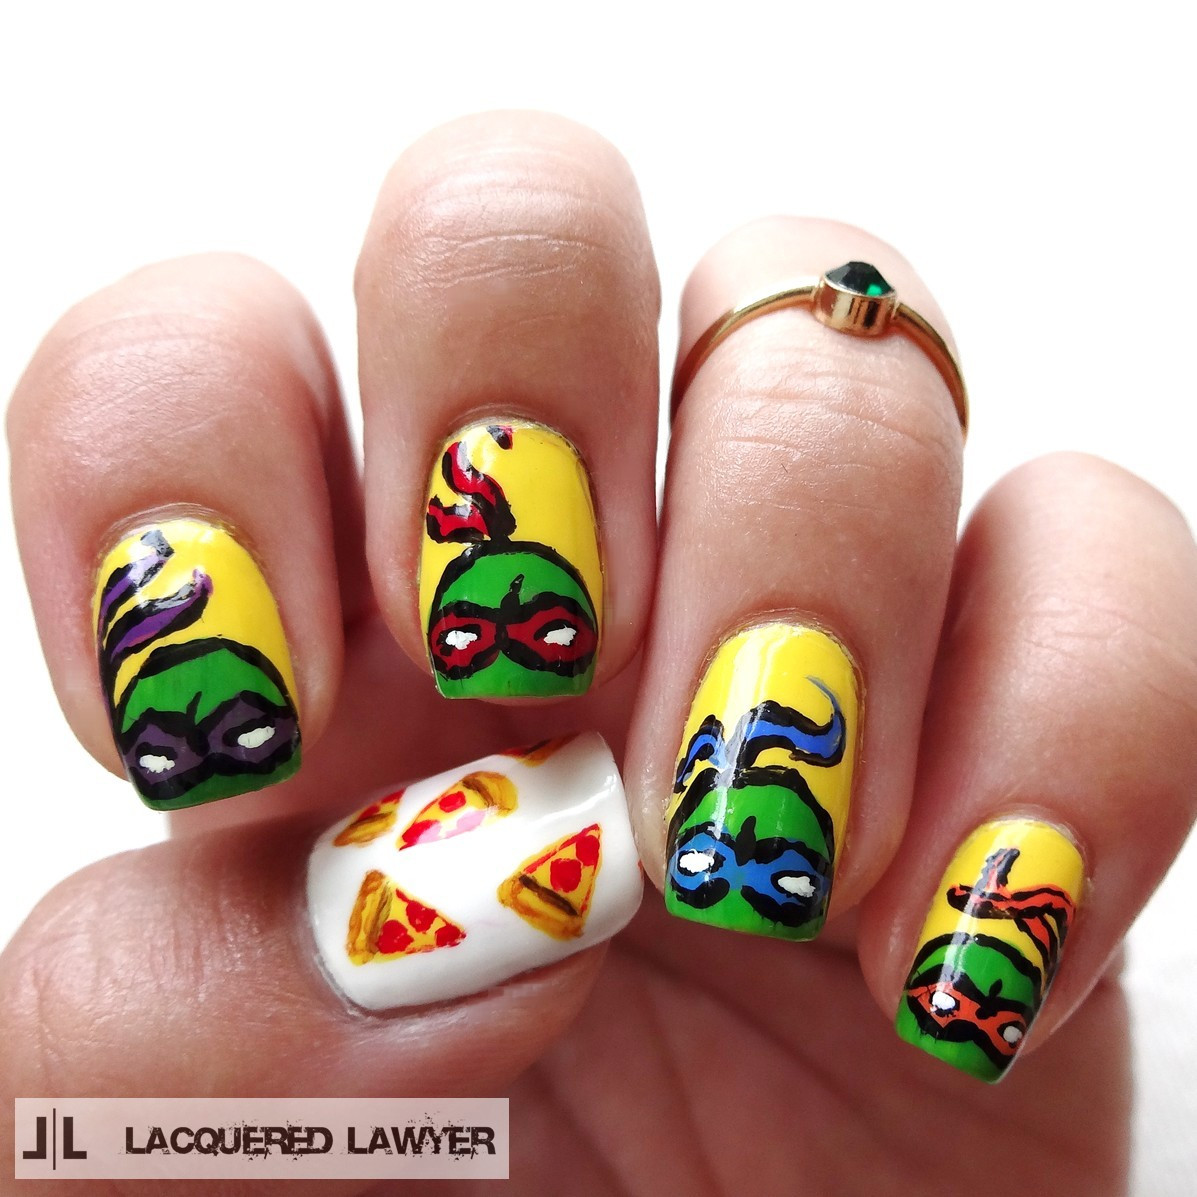 Ninja Turtle Nail Designs
 Lacquered Lawyer